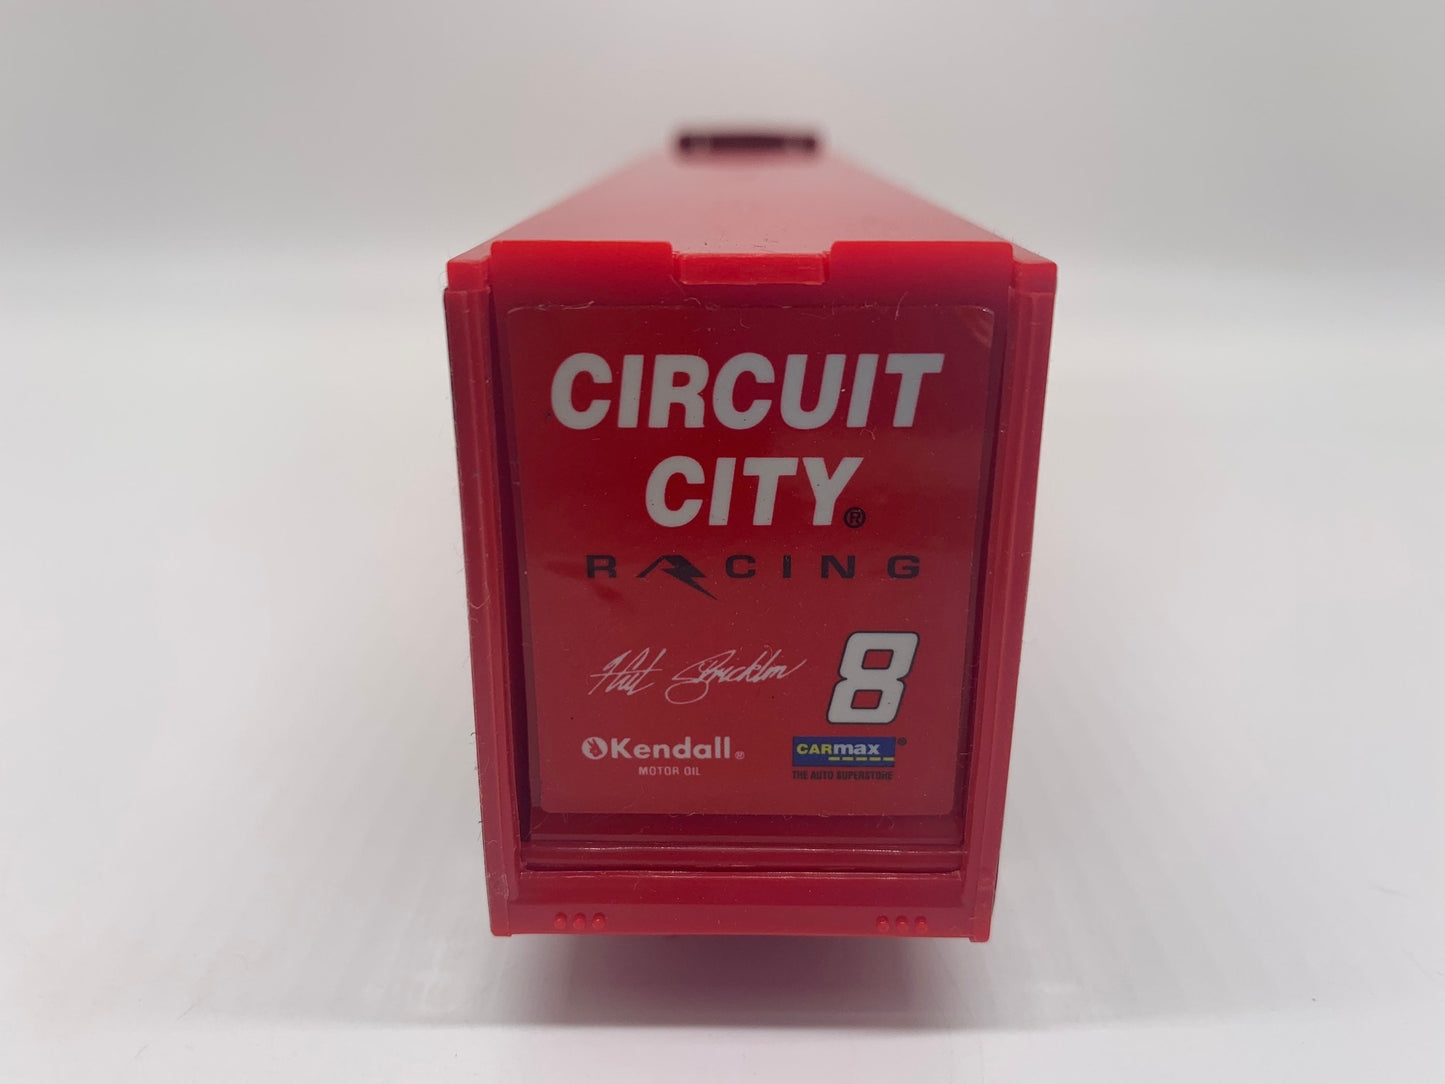 Racing Champions Racing Team Transporter Truck Red Circuit City Perfect Birthday Gift Collectible Miniature Scale Model Toy Car